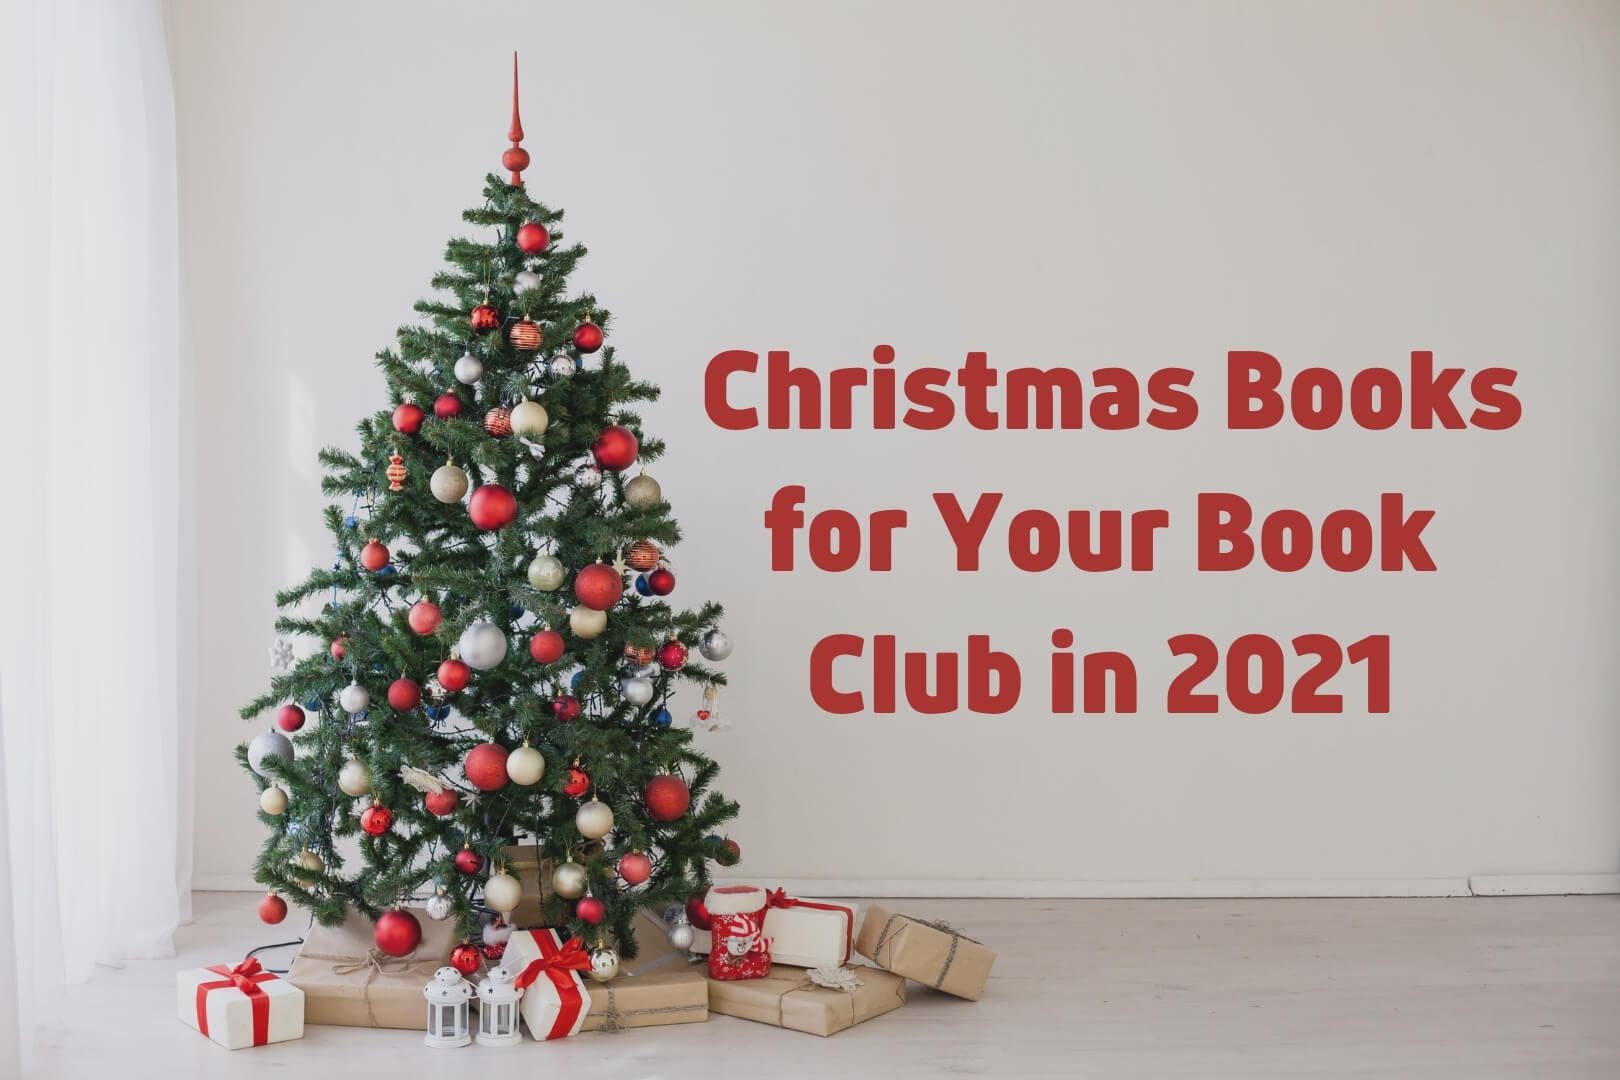 6 Christmas Books for your Book Club in 2021